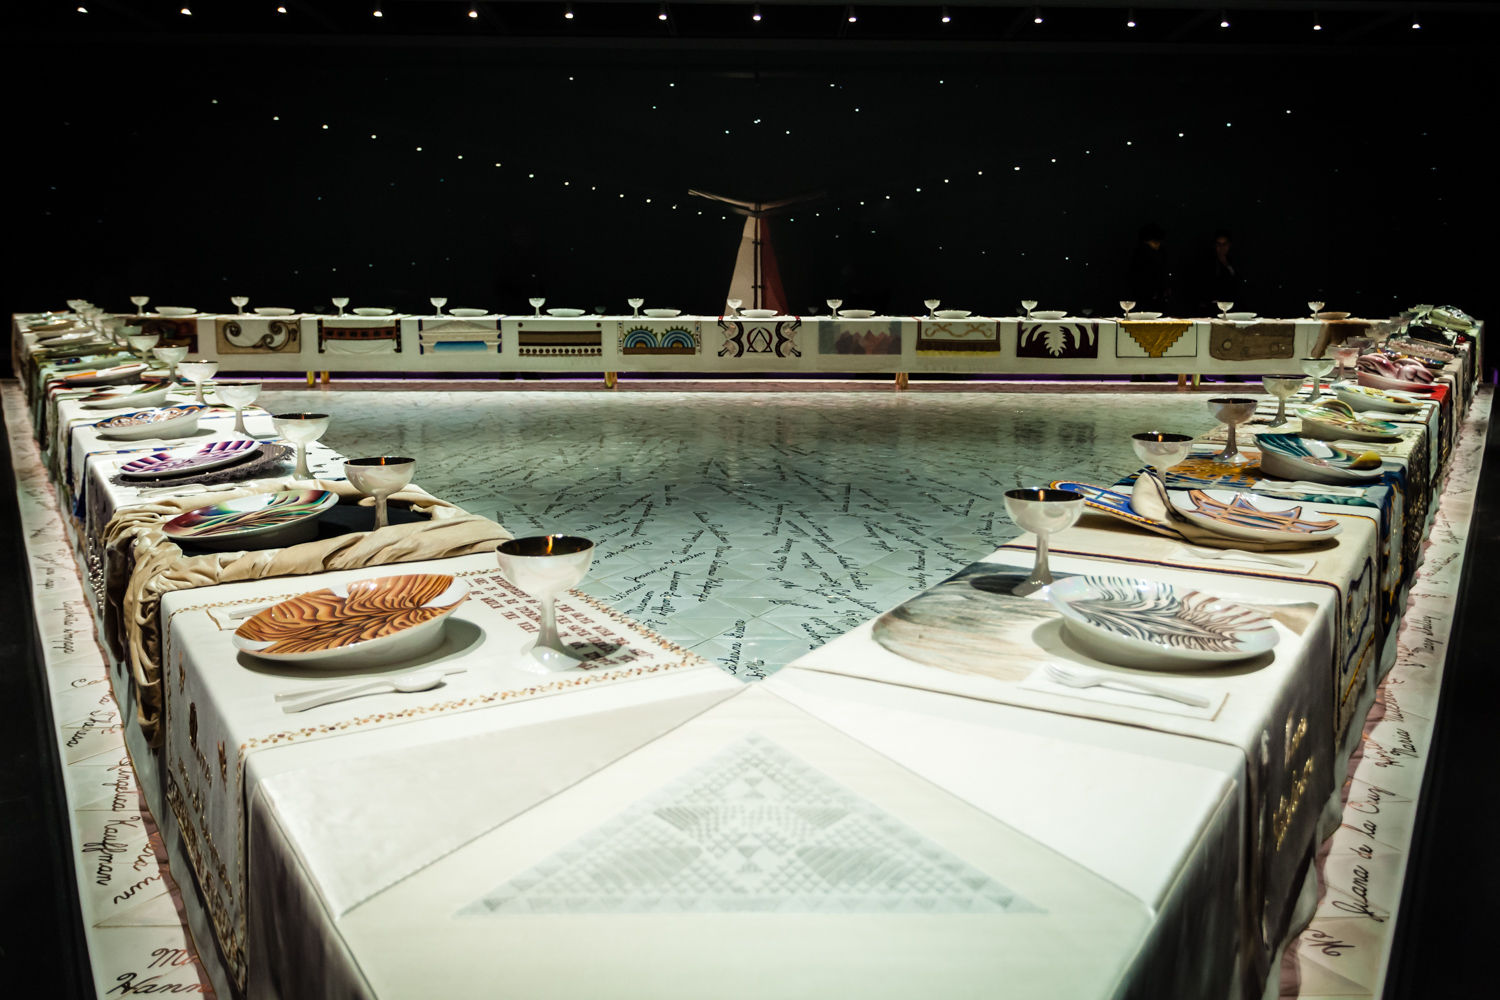 Image of Judy Chicago's art installation The Dinner Party. Depicted is a large banquet table in the shape of a triangle with thirty-nine place settings, embroidered runners, gold chalices and utensils, and china painted porcelain plates. The names of important women from history are inscribed in gold on the white floor below the table.